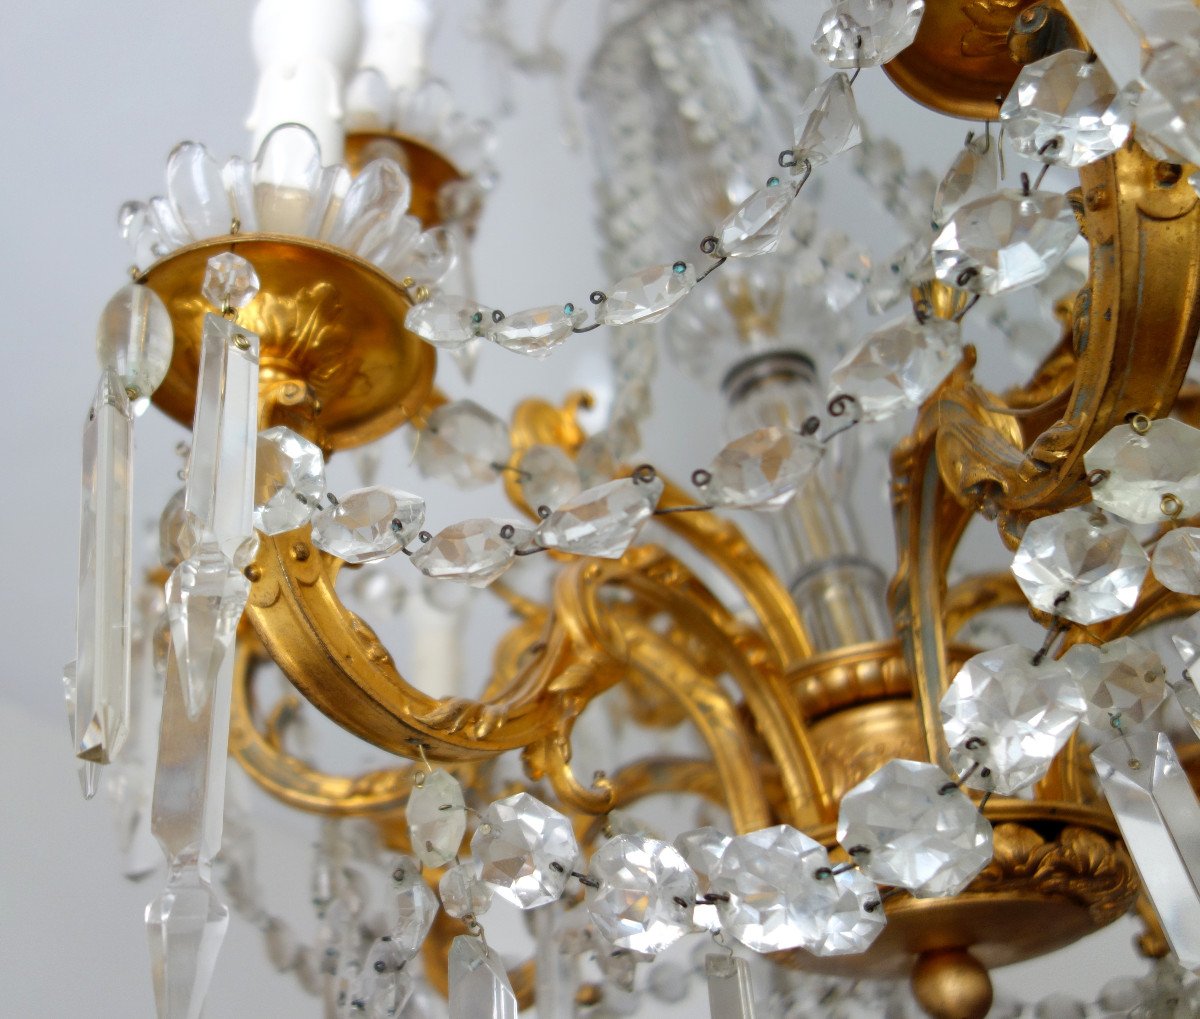 Baccarat - Chandelier 10 Lights In Chased Bronze And Gilded With Fine Gold - Late 19th Century-photo-3